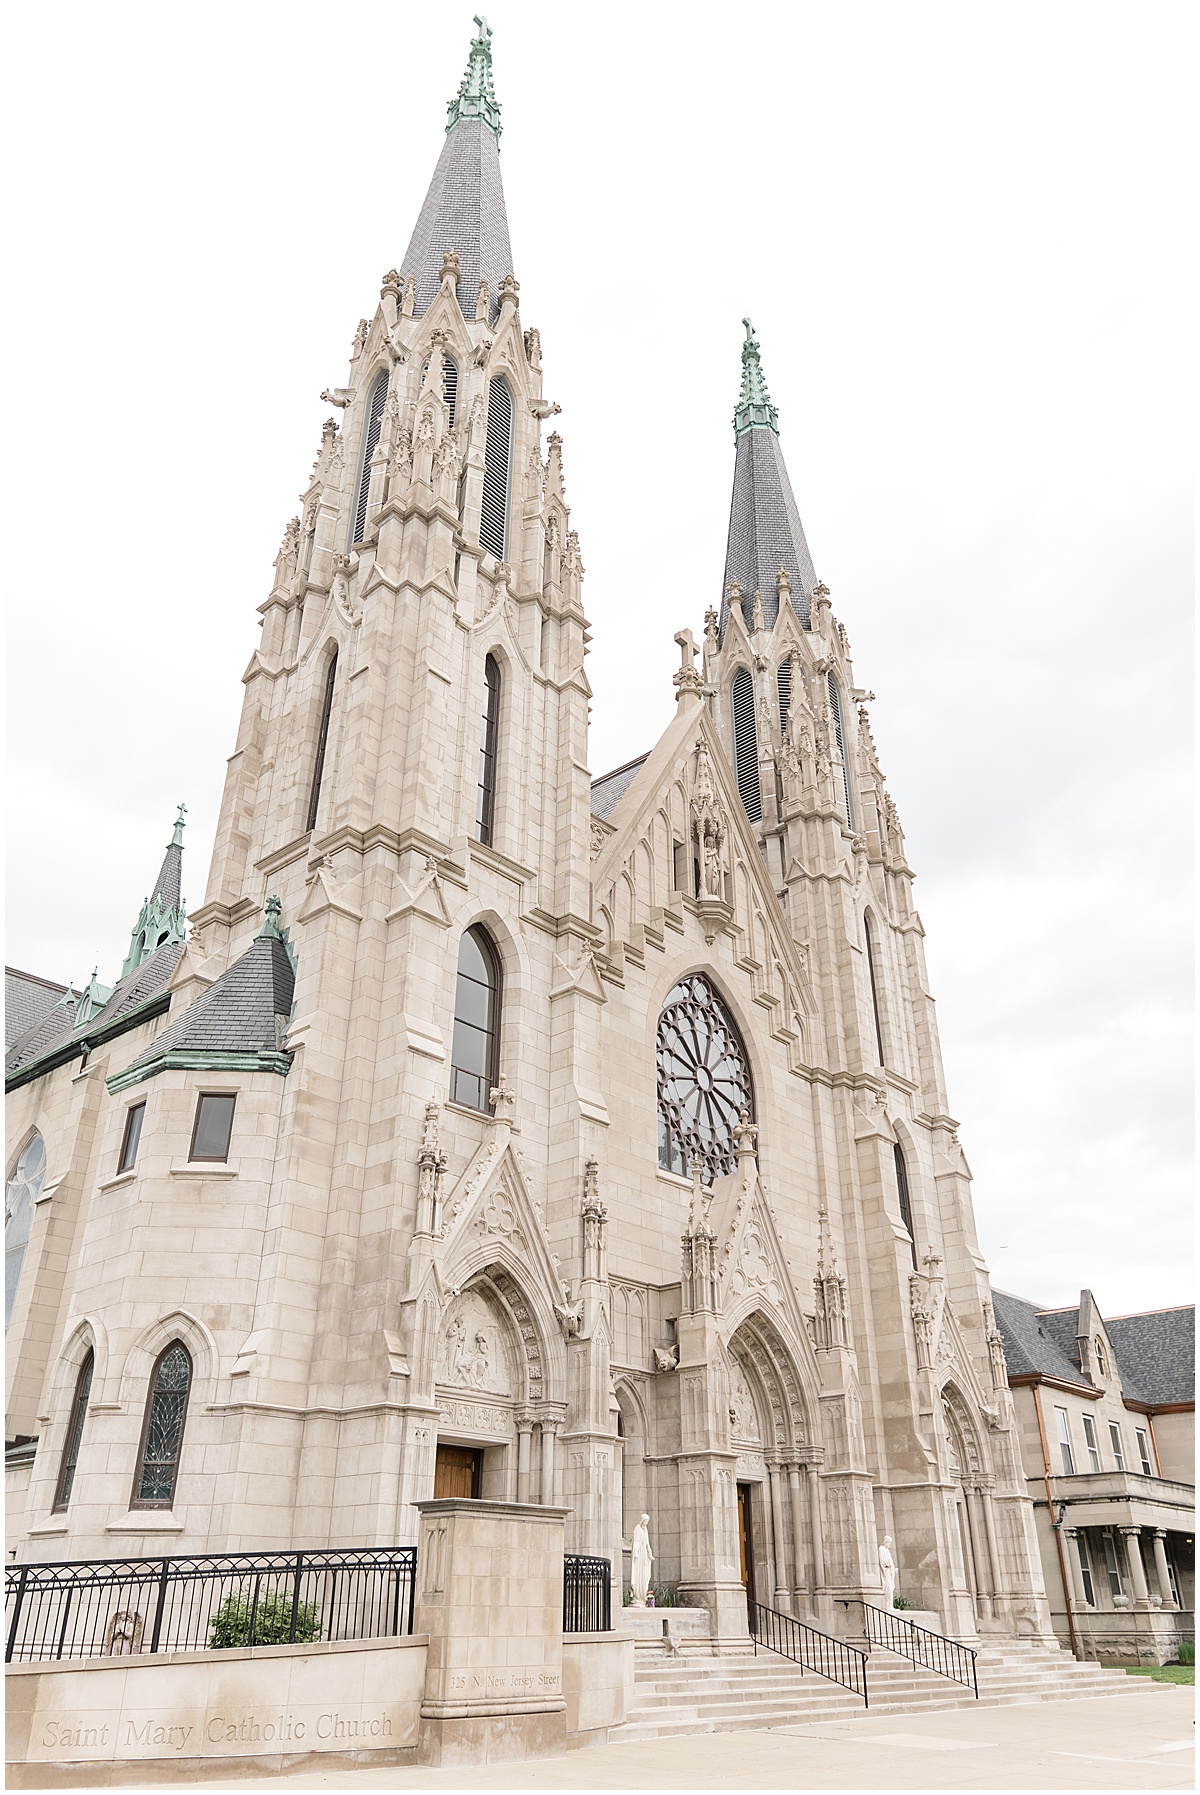 Saint Mary's Catholic Cathedral exterior in downtown Indianapolis